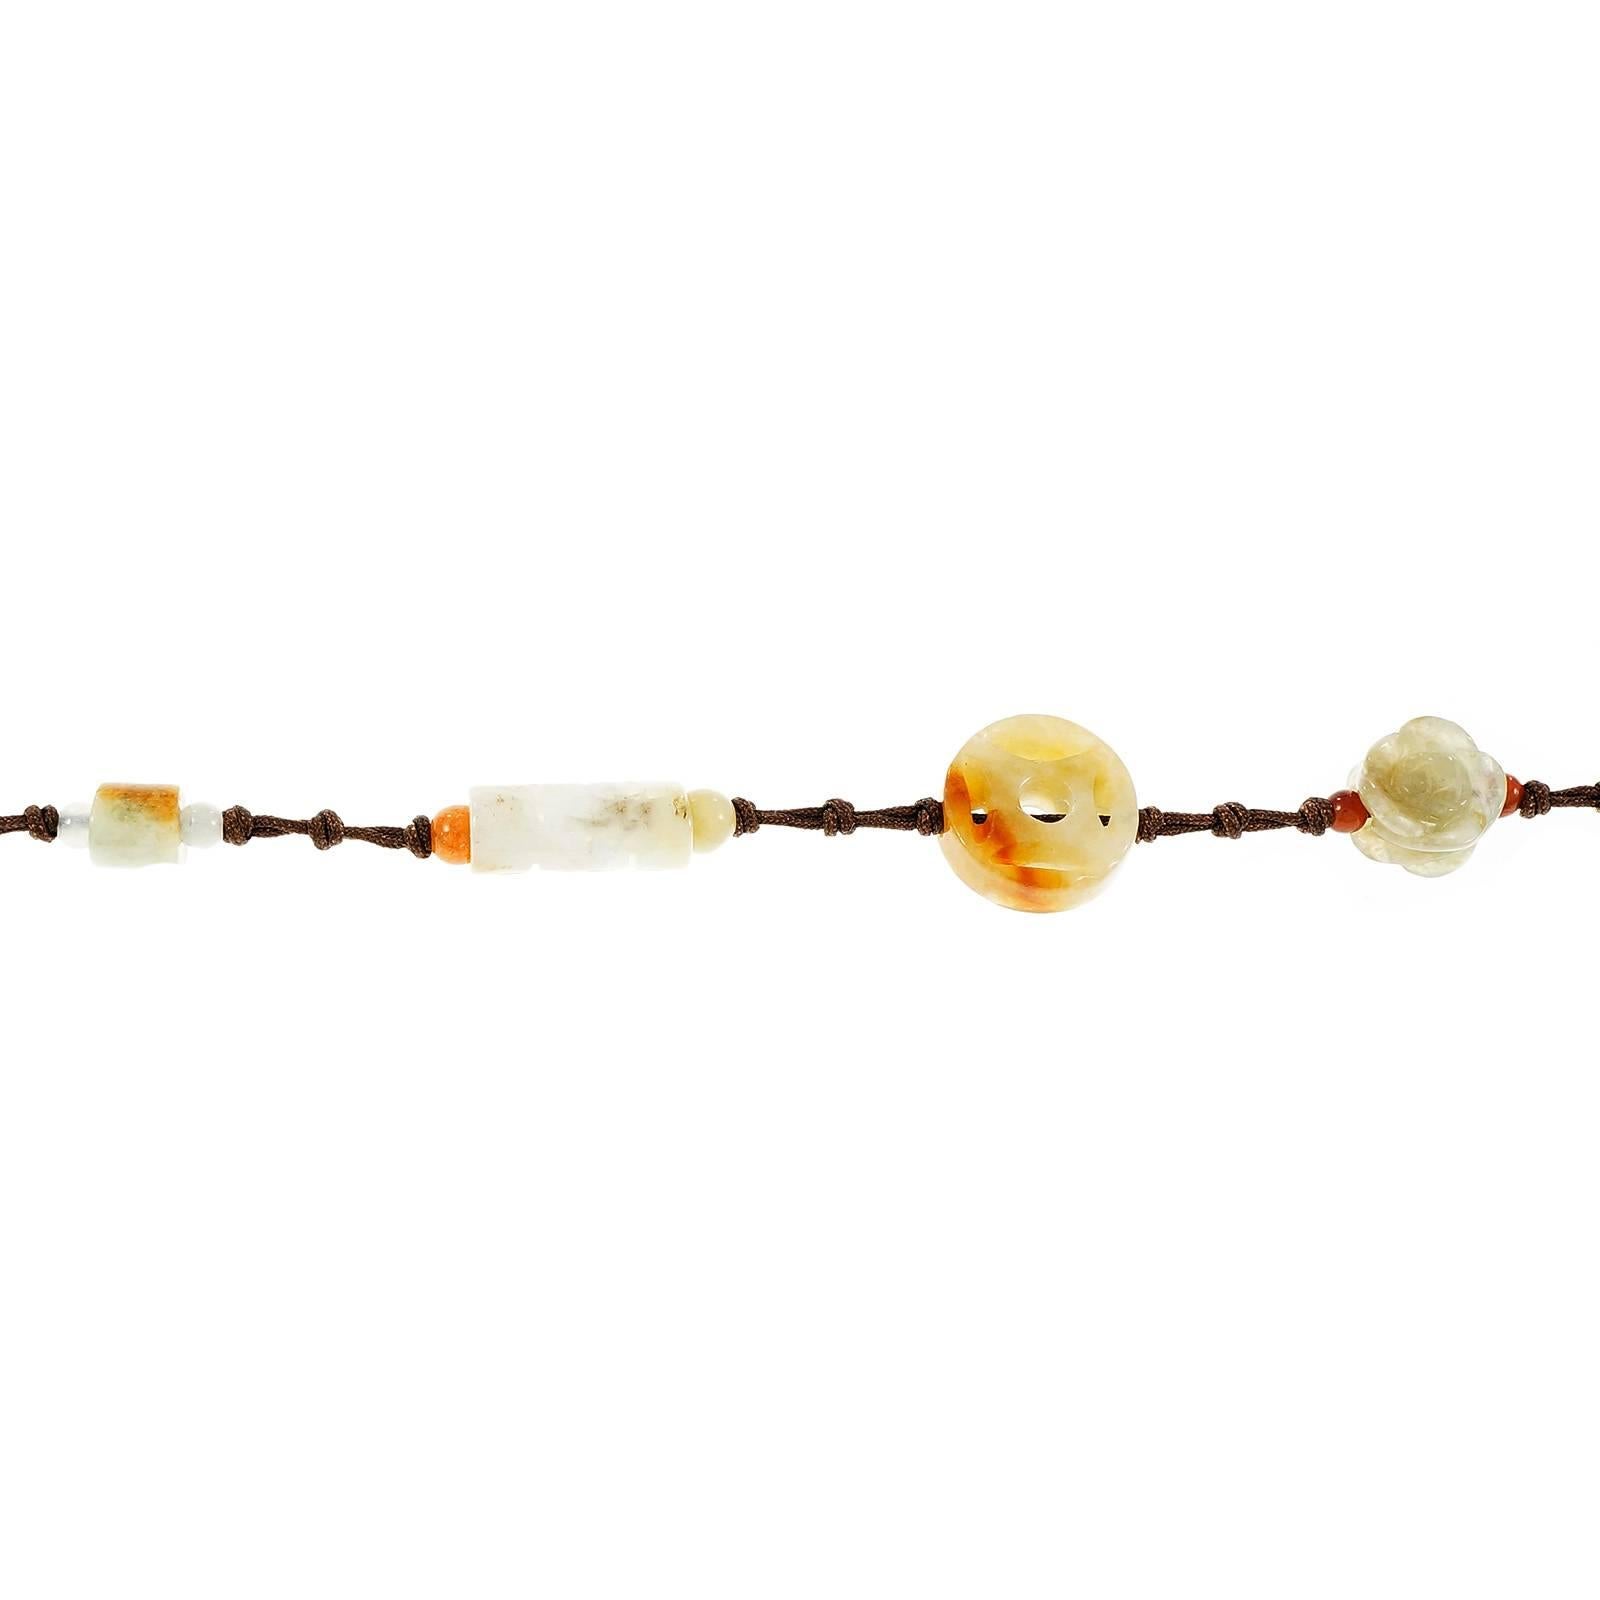 GIA certified natural Jadeite Jade carved multi stone multi color necklace. The larger circle in the middle and one other Jade were random tested as natural untreated Jadeite Jade.

113 carved ring and oval white, light green, orange and red